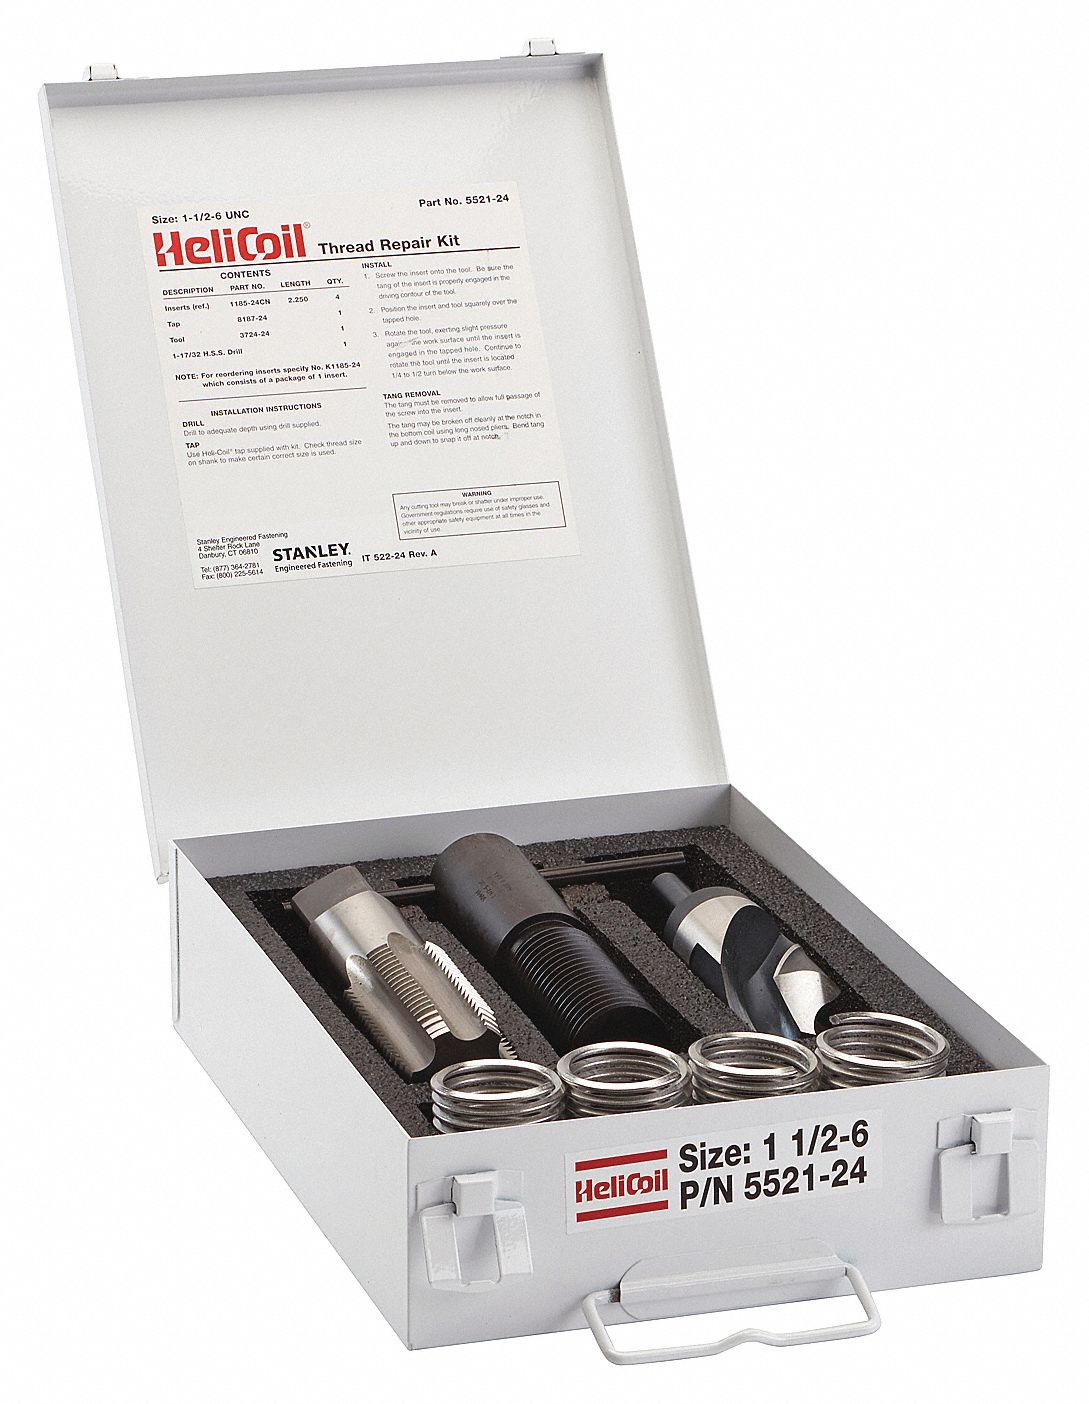 Thread Repair Kit No 5521-6 Helicoil Division 3pk for sale online 